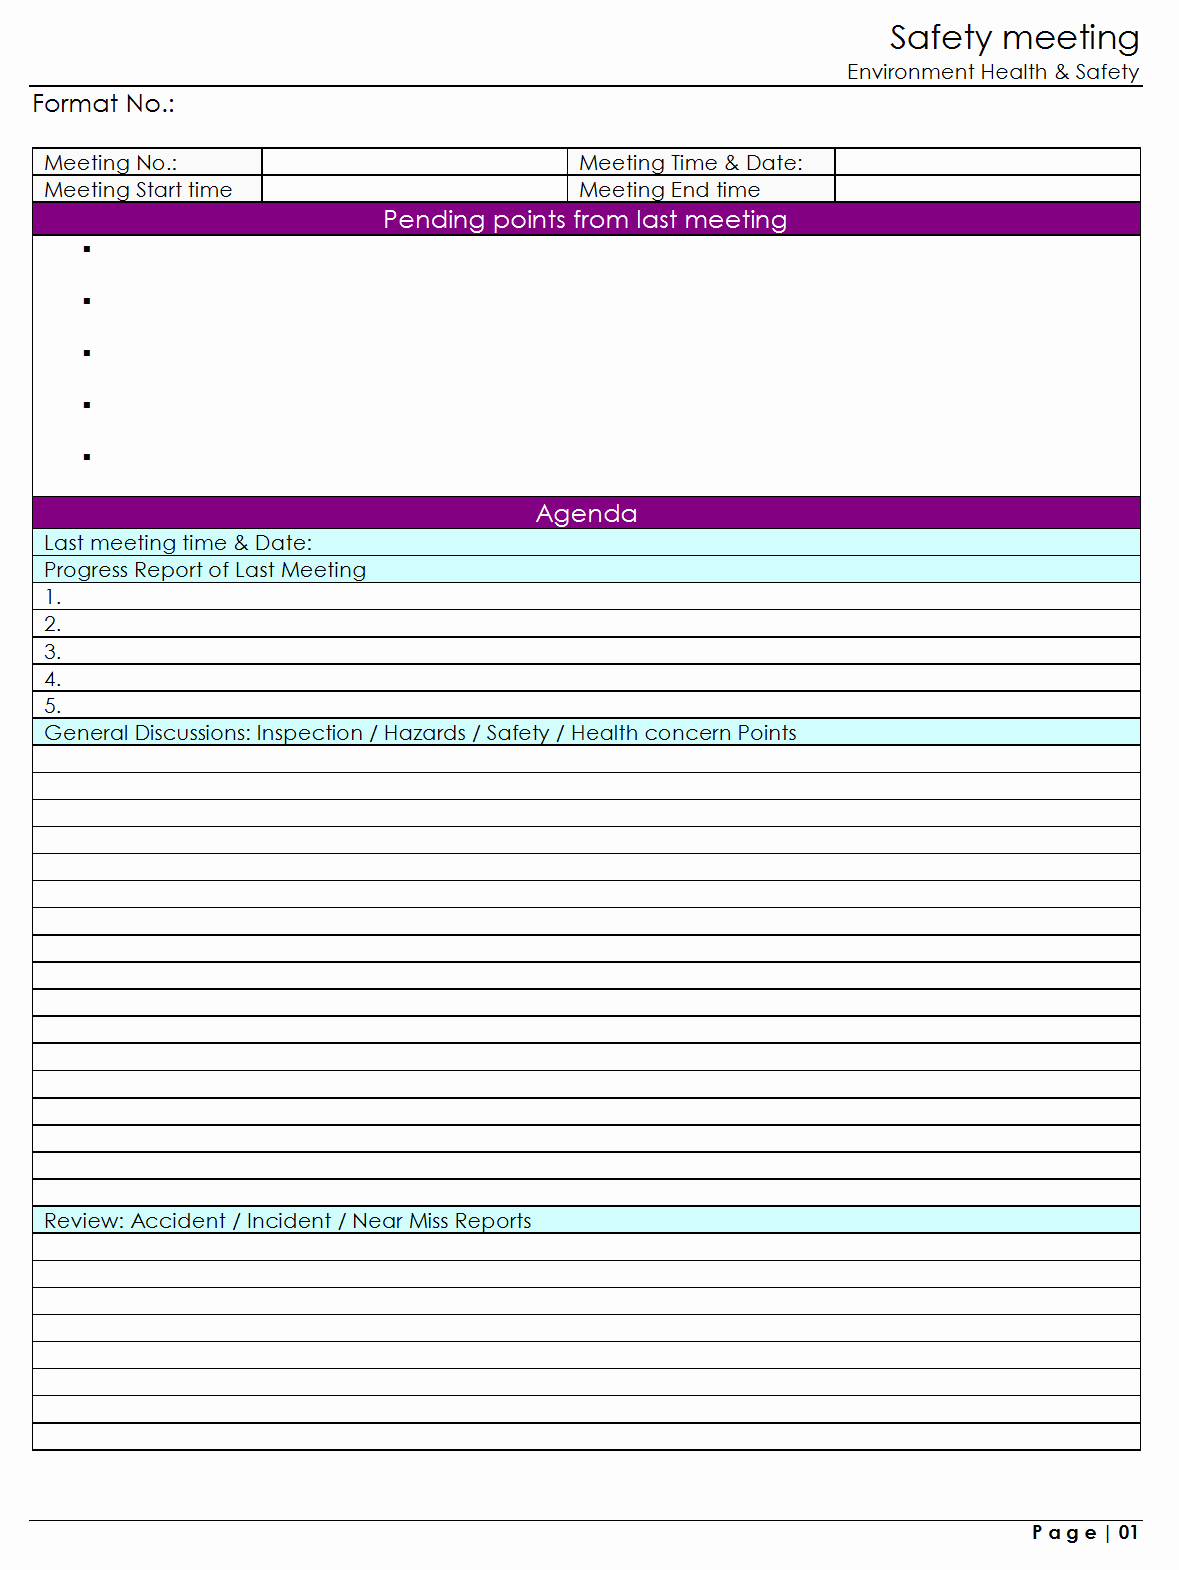 Safety Meeting Minutes Template Lovely Safety Meeting